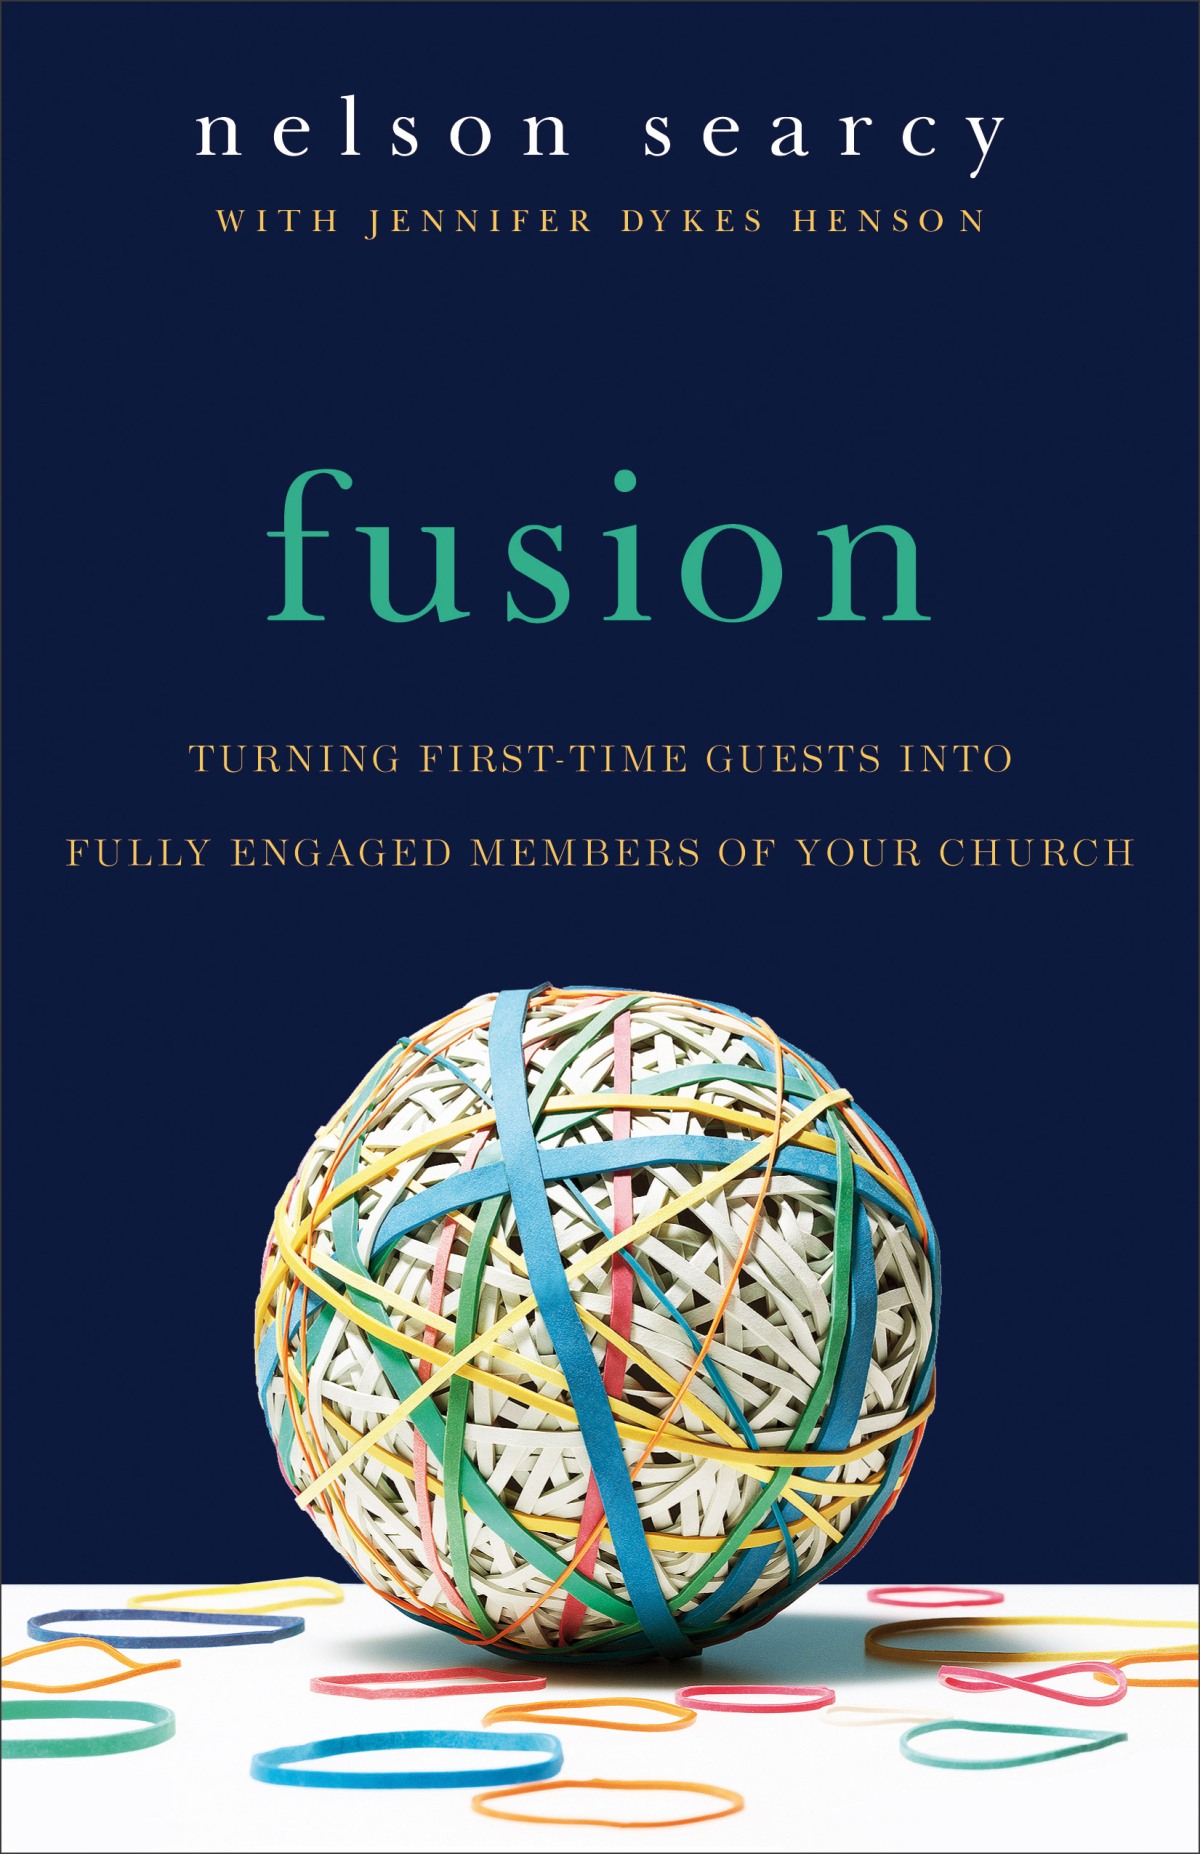 Fusion ~ A Book Review